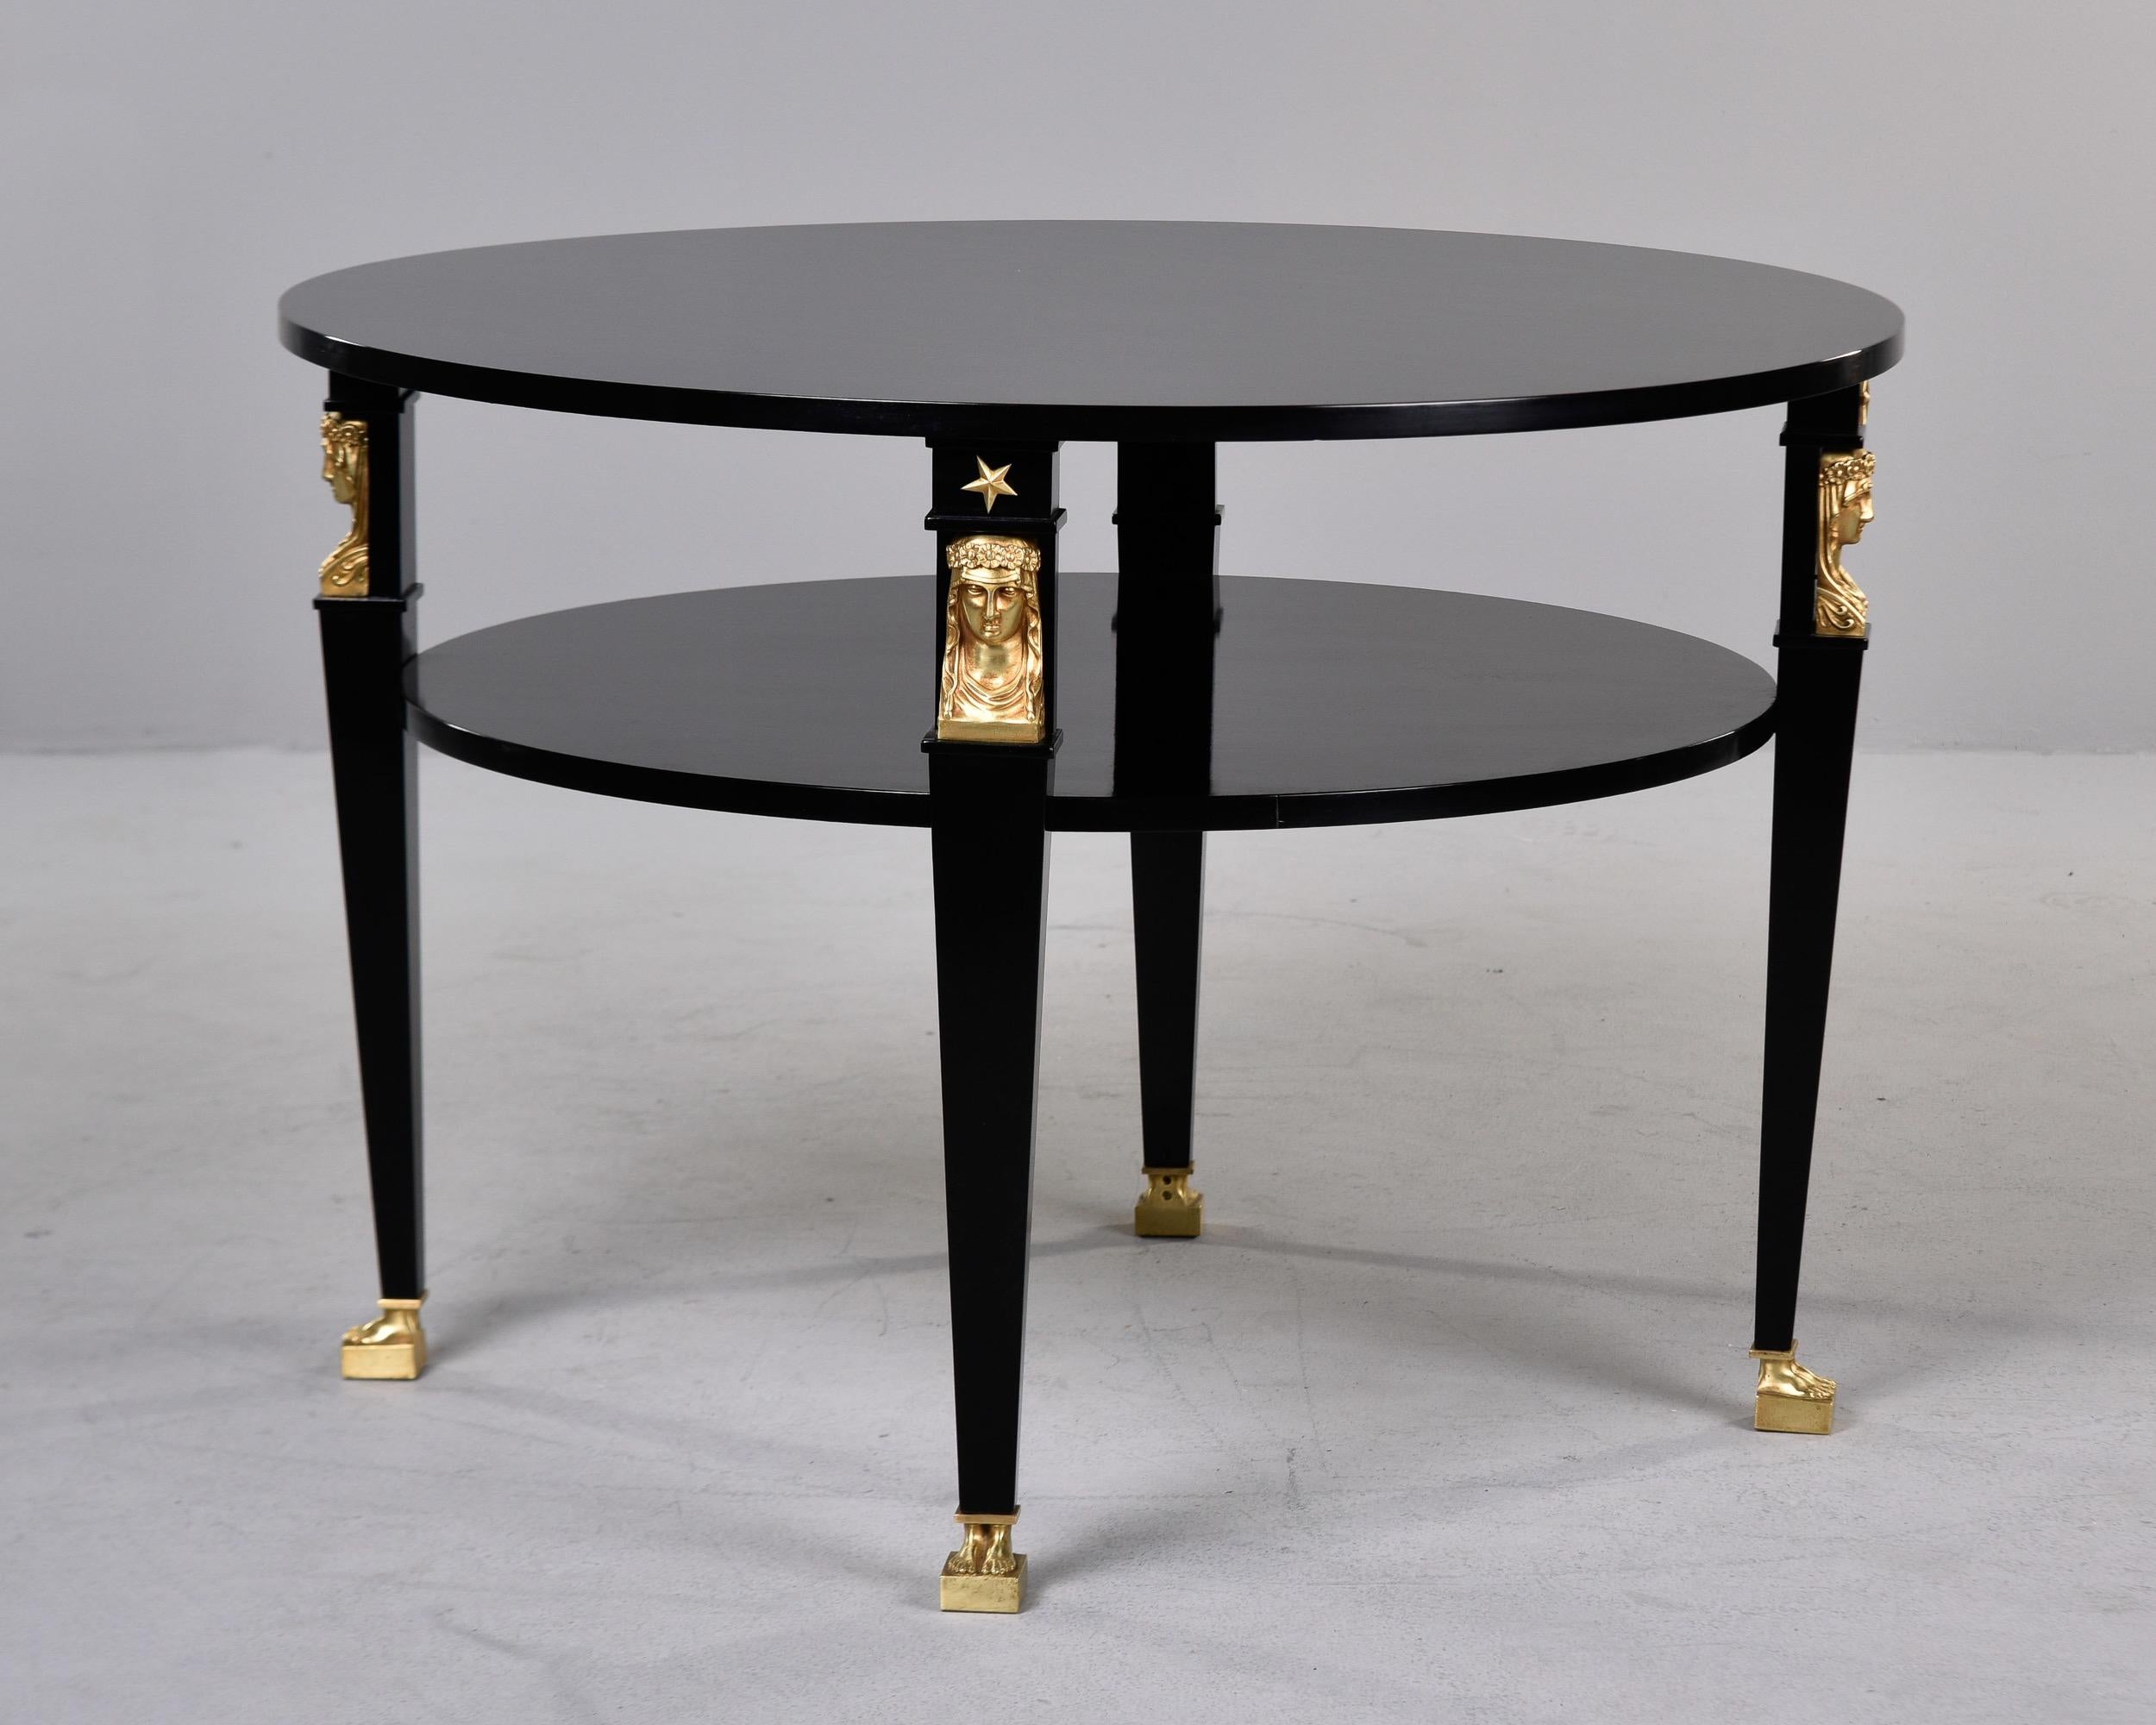 Bronze 19th C Empire Ebonised Round Table with Brass Figural Mounts For Sale